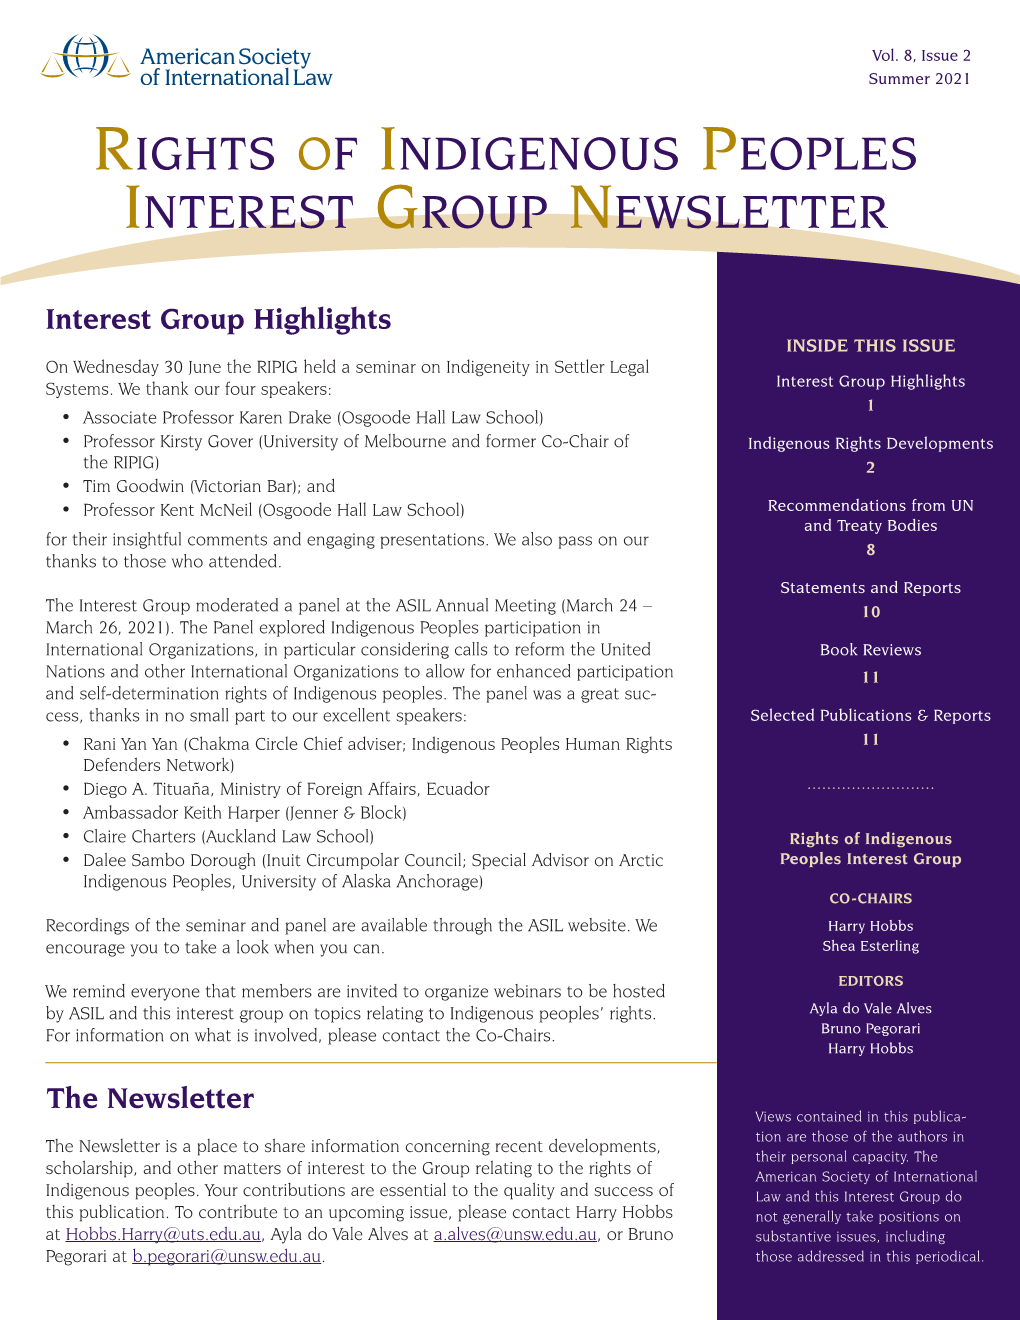 Rights of Indigenous Peoples Interest Group Newsletter